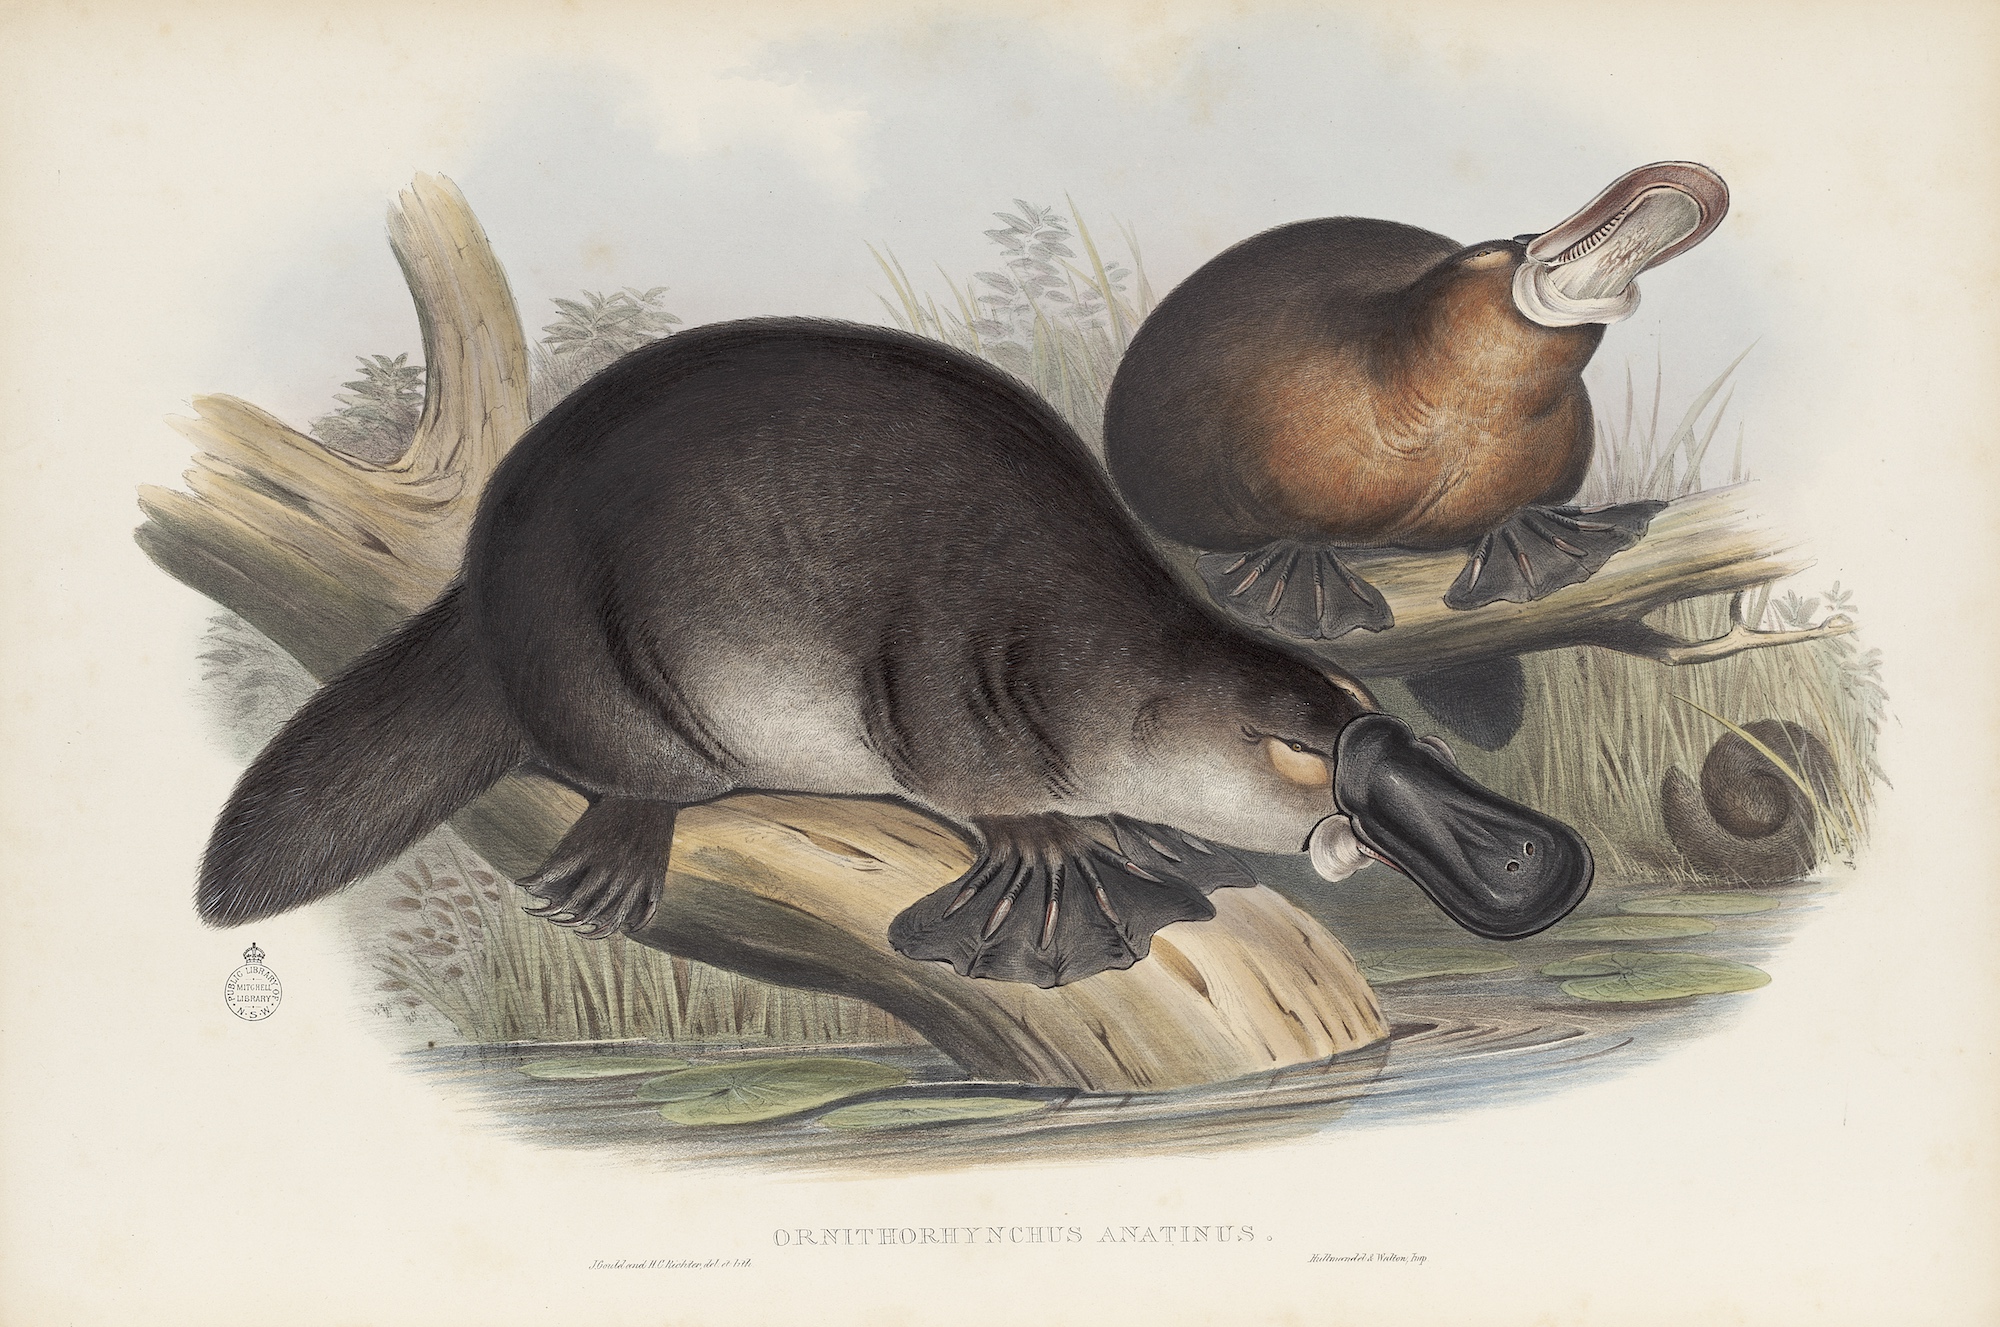 Image of Duck-billed platypus from John Gould, The Mammals of Australia,1855